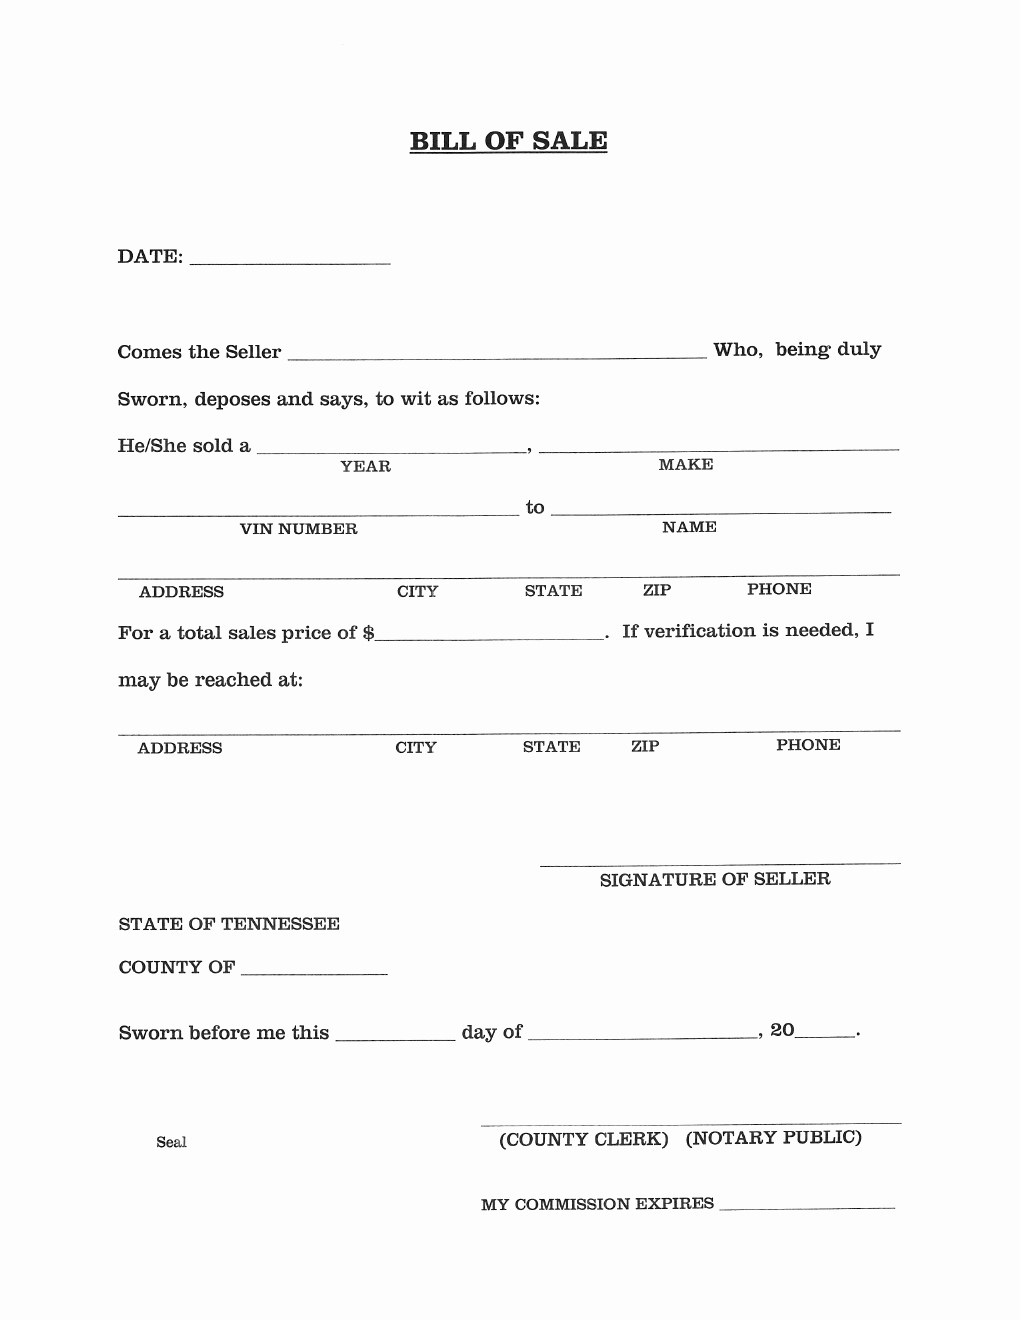 Generic Bill Of Sale Motorcycle Lovely Free Tennessee Vehicle Bill Of Sale form Download Pdf